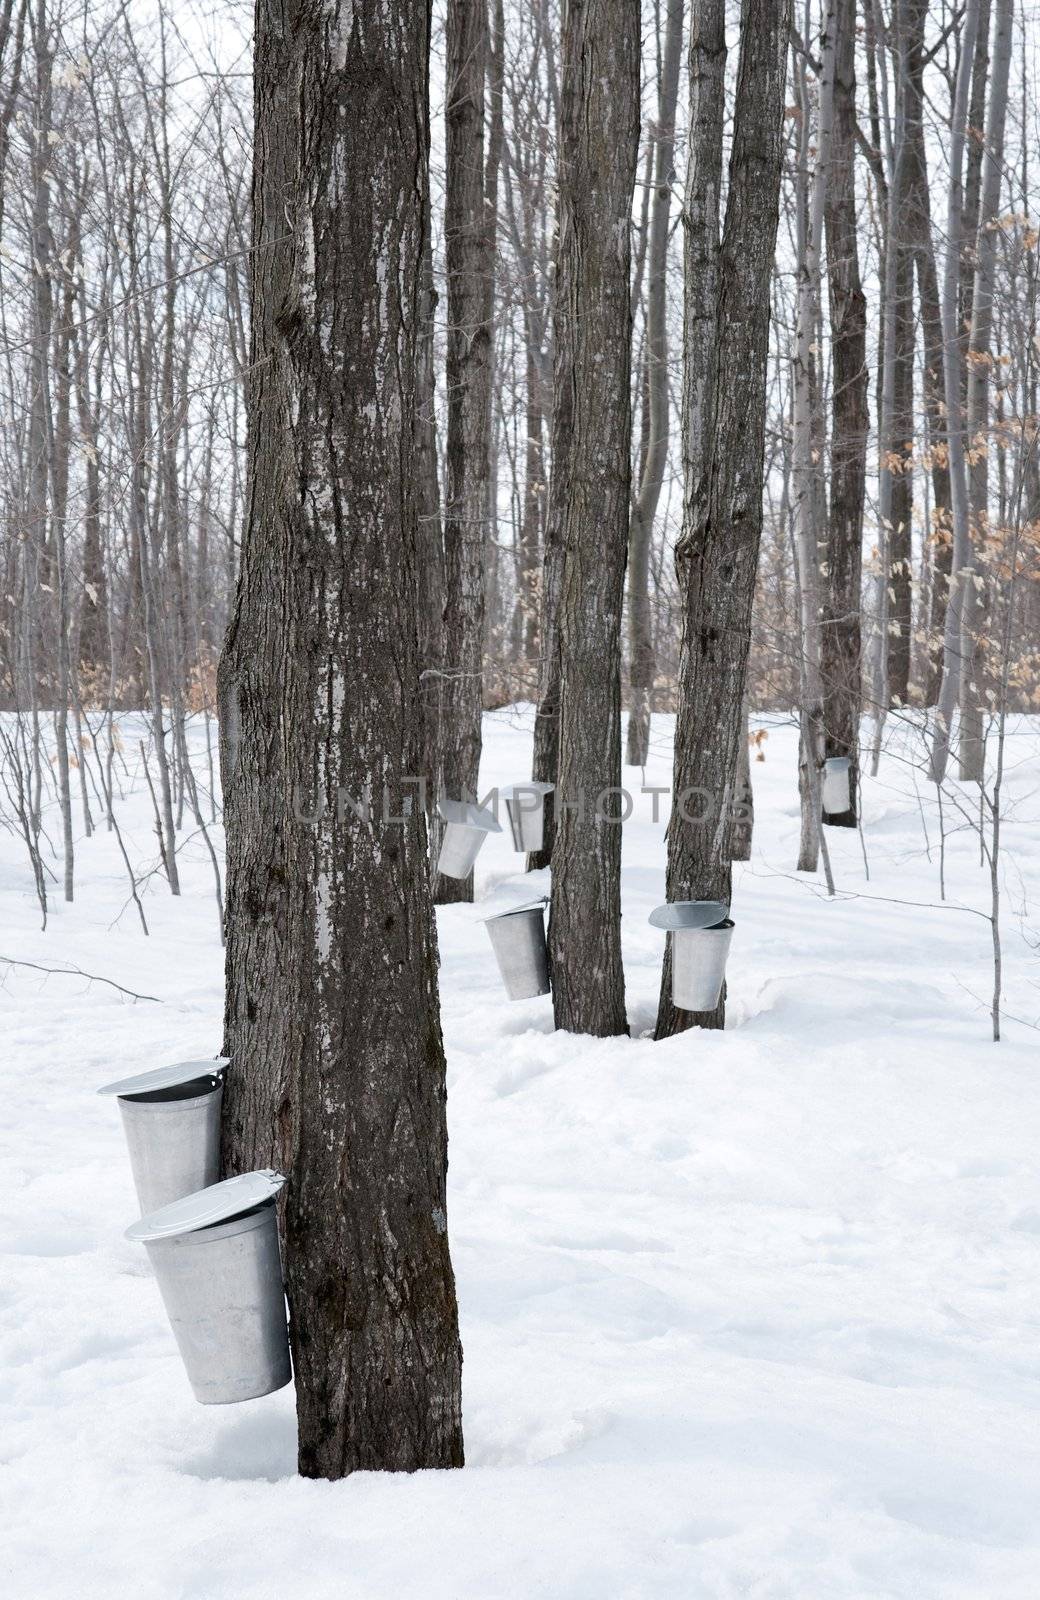 Collecting sap for maple syrup production. Quebec, Canada.